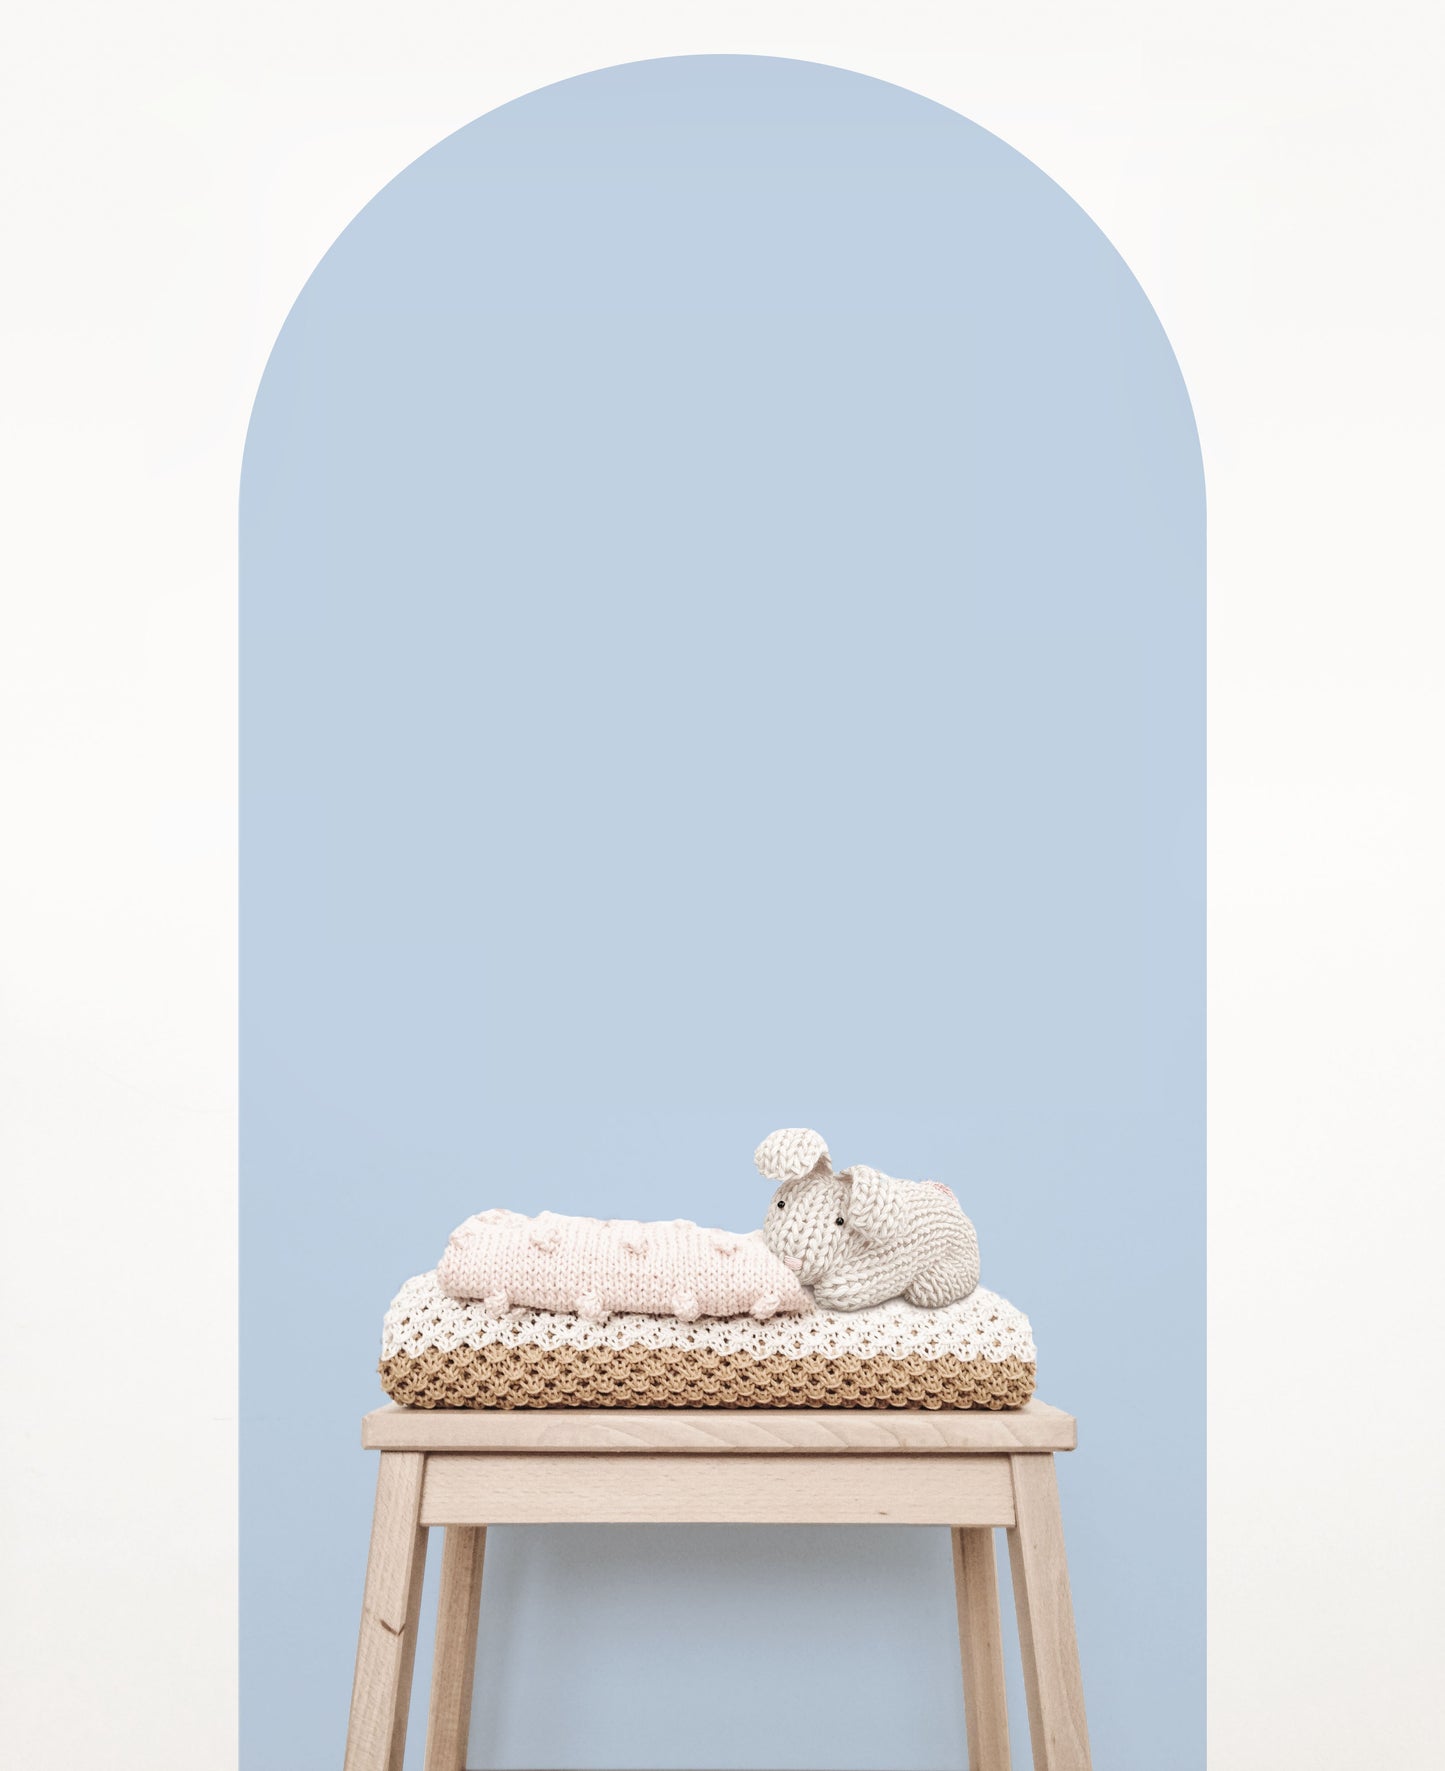 Arch Wall Decal - Sky Blue - Wall Decals Australia - Fable and Fawn 